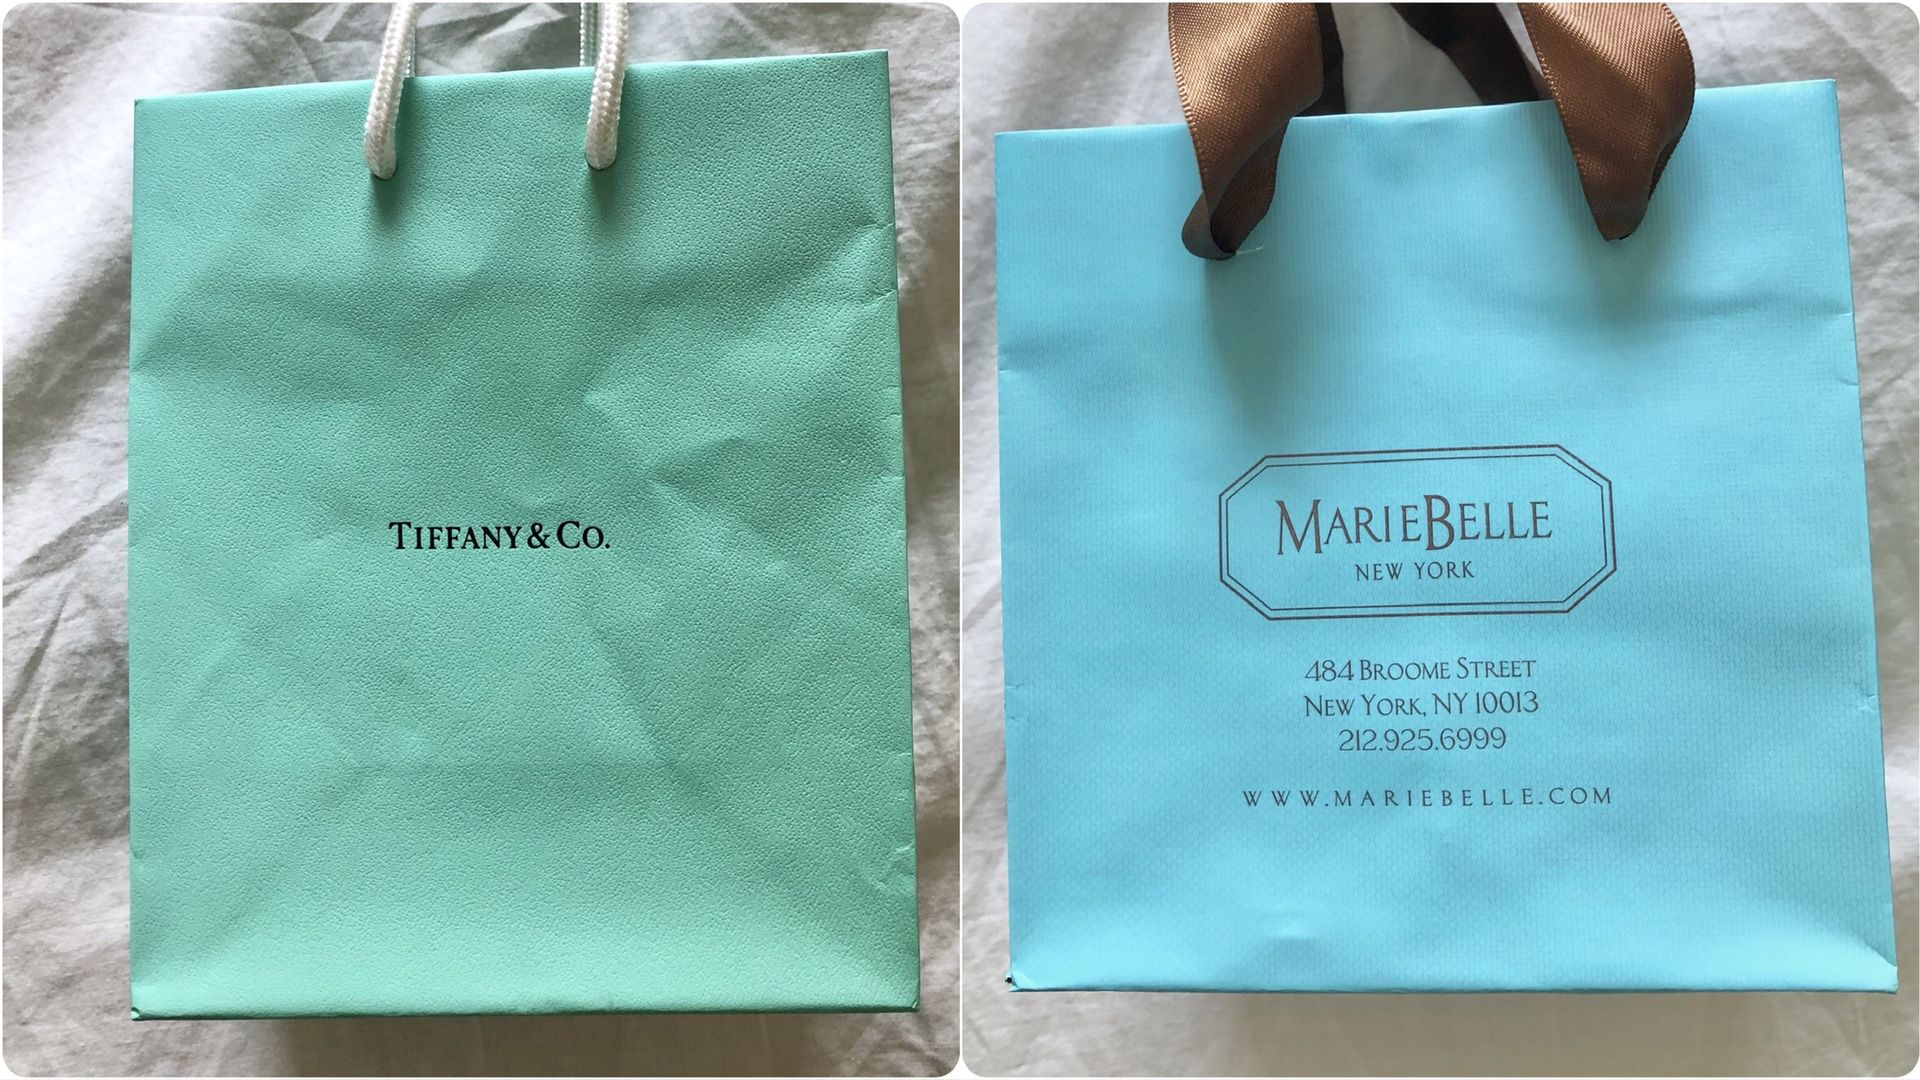 2 SMALL LUXURY GIFT BAGS - AUTHENTIC TIFFANY & CO + MARIE BELLE